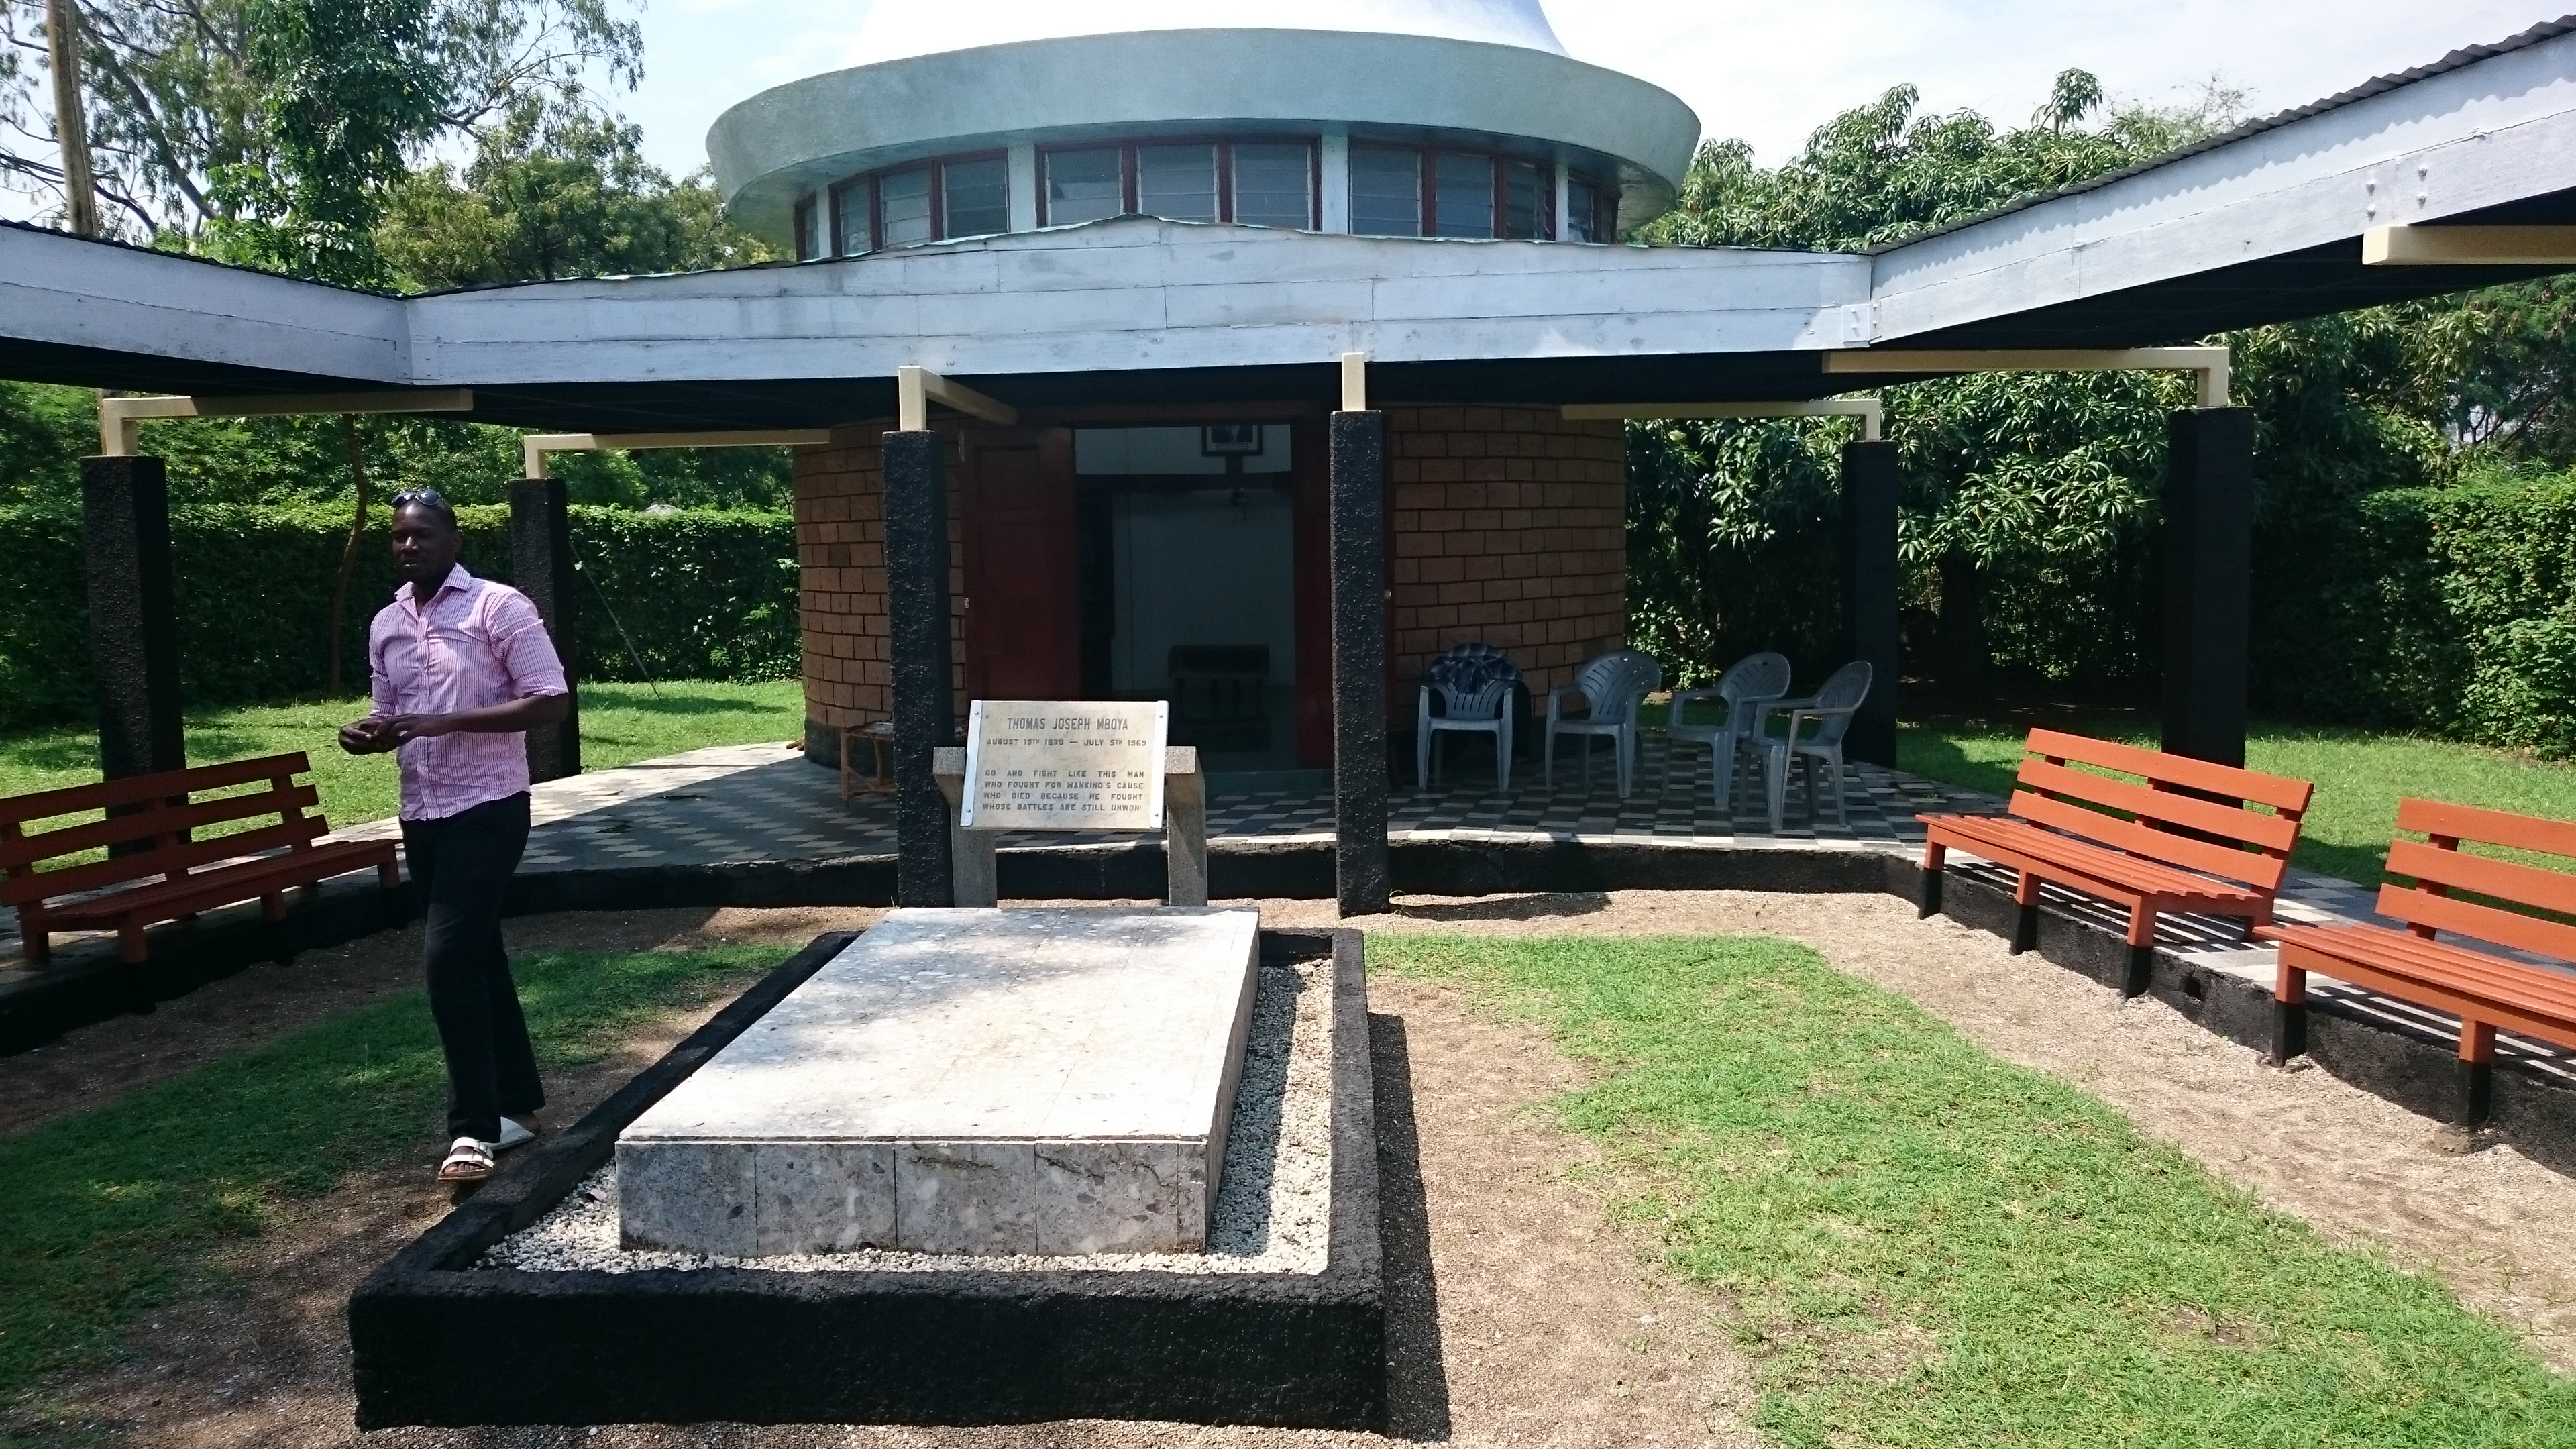 Visit the Tom Mboya Mausoleum while in Rusinga. Image from http://owaahh.com/the-rusinga-island-festival/